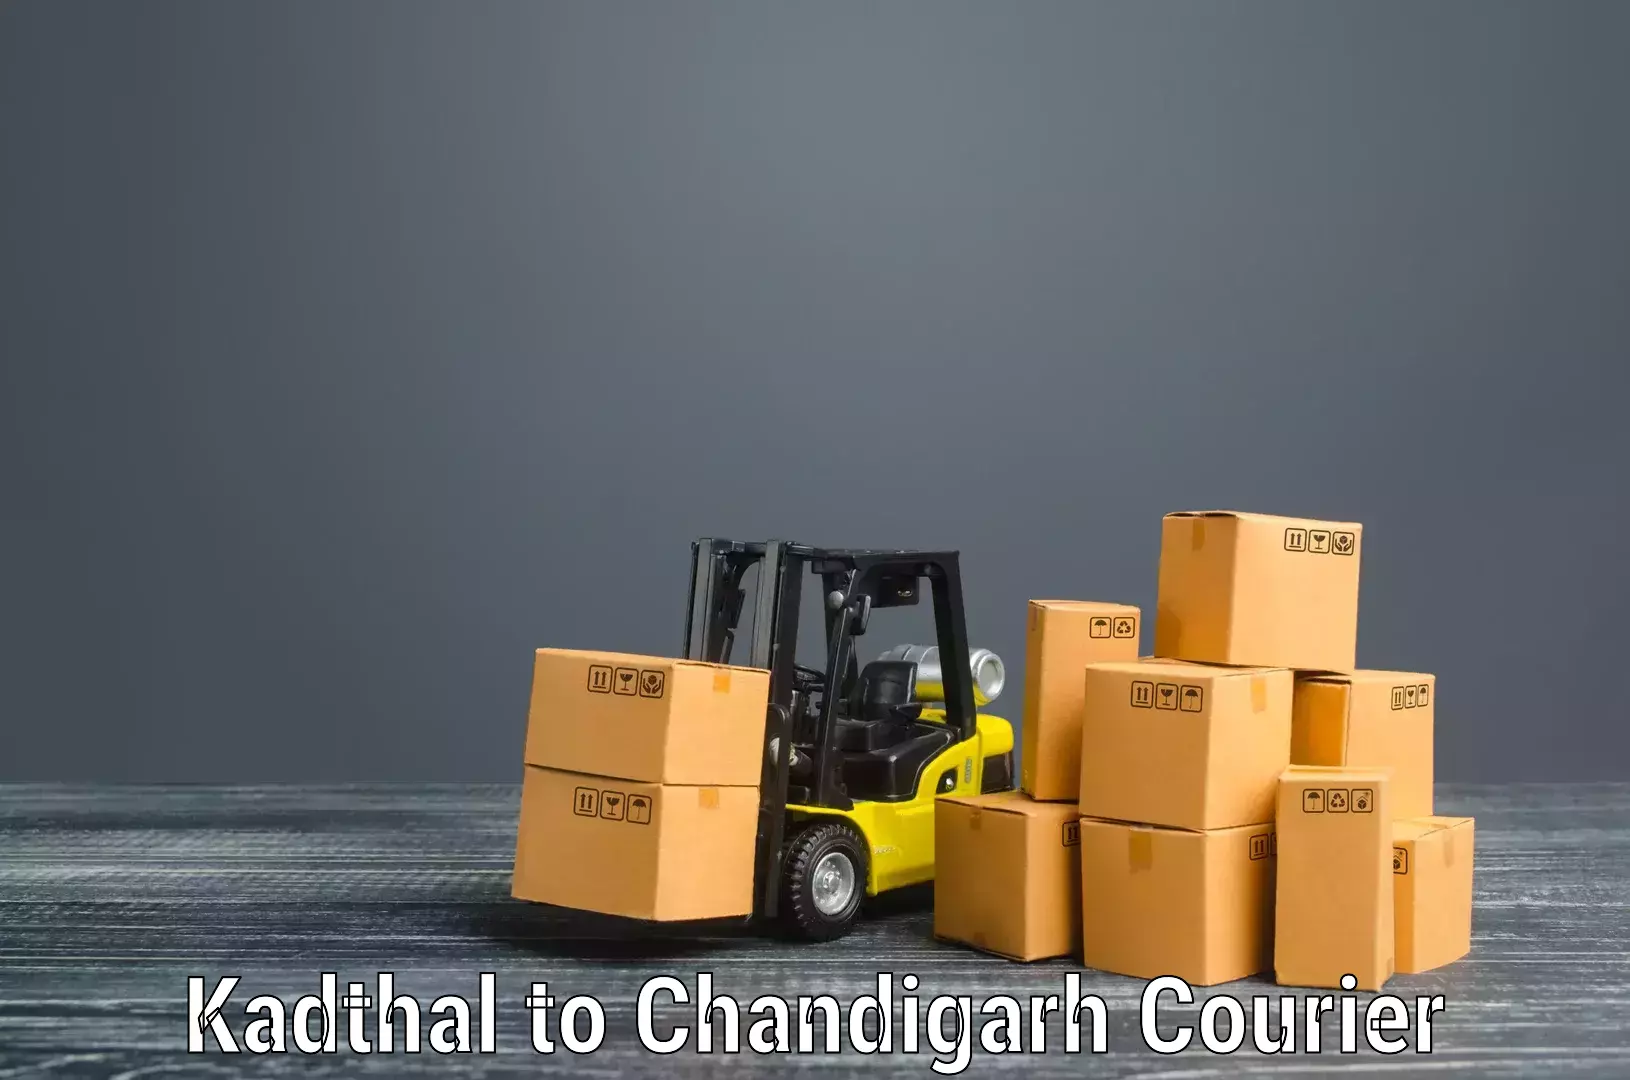 Furniture moving experts Kadthal to Chandigarh